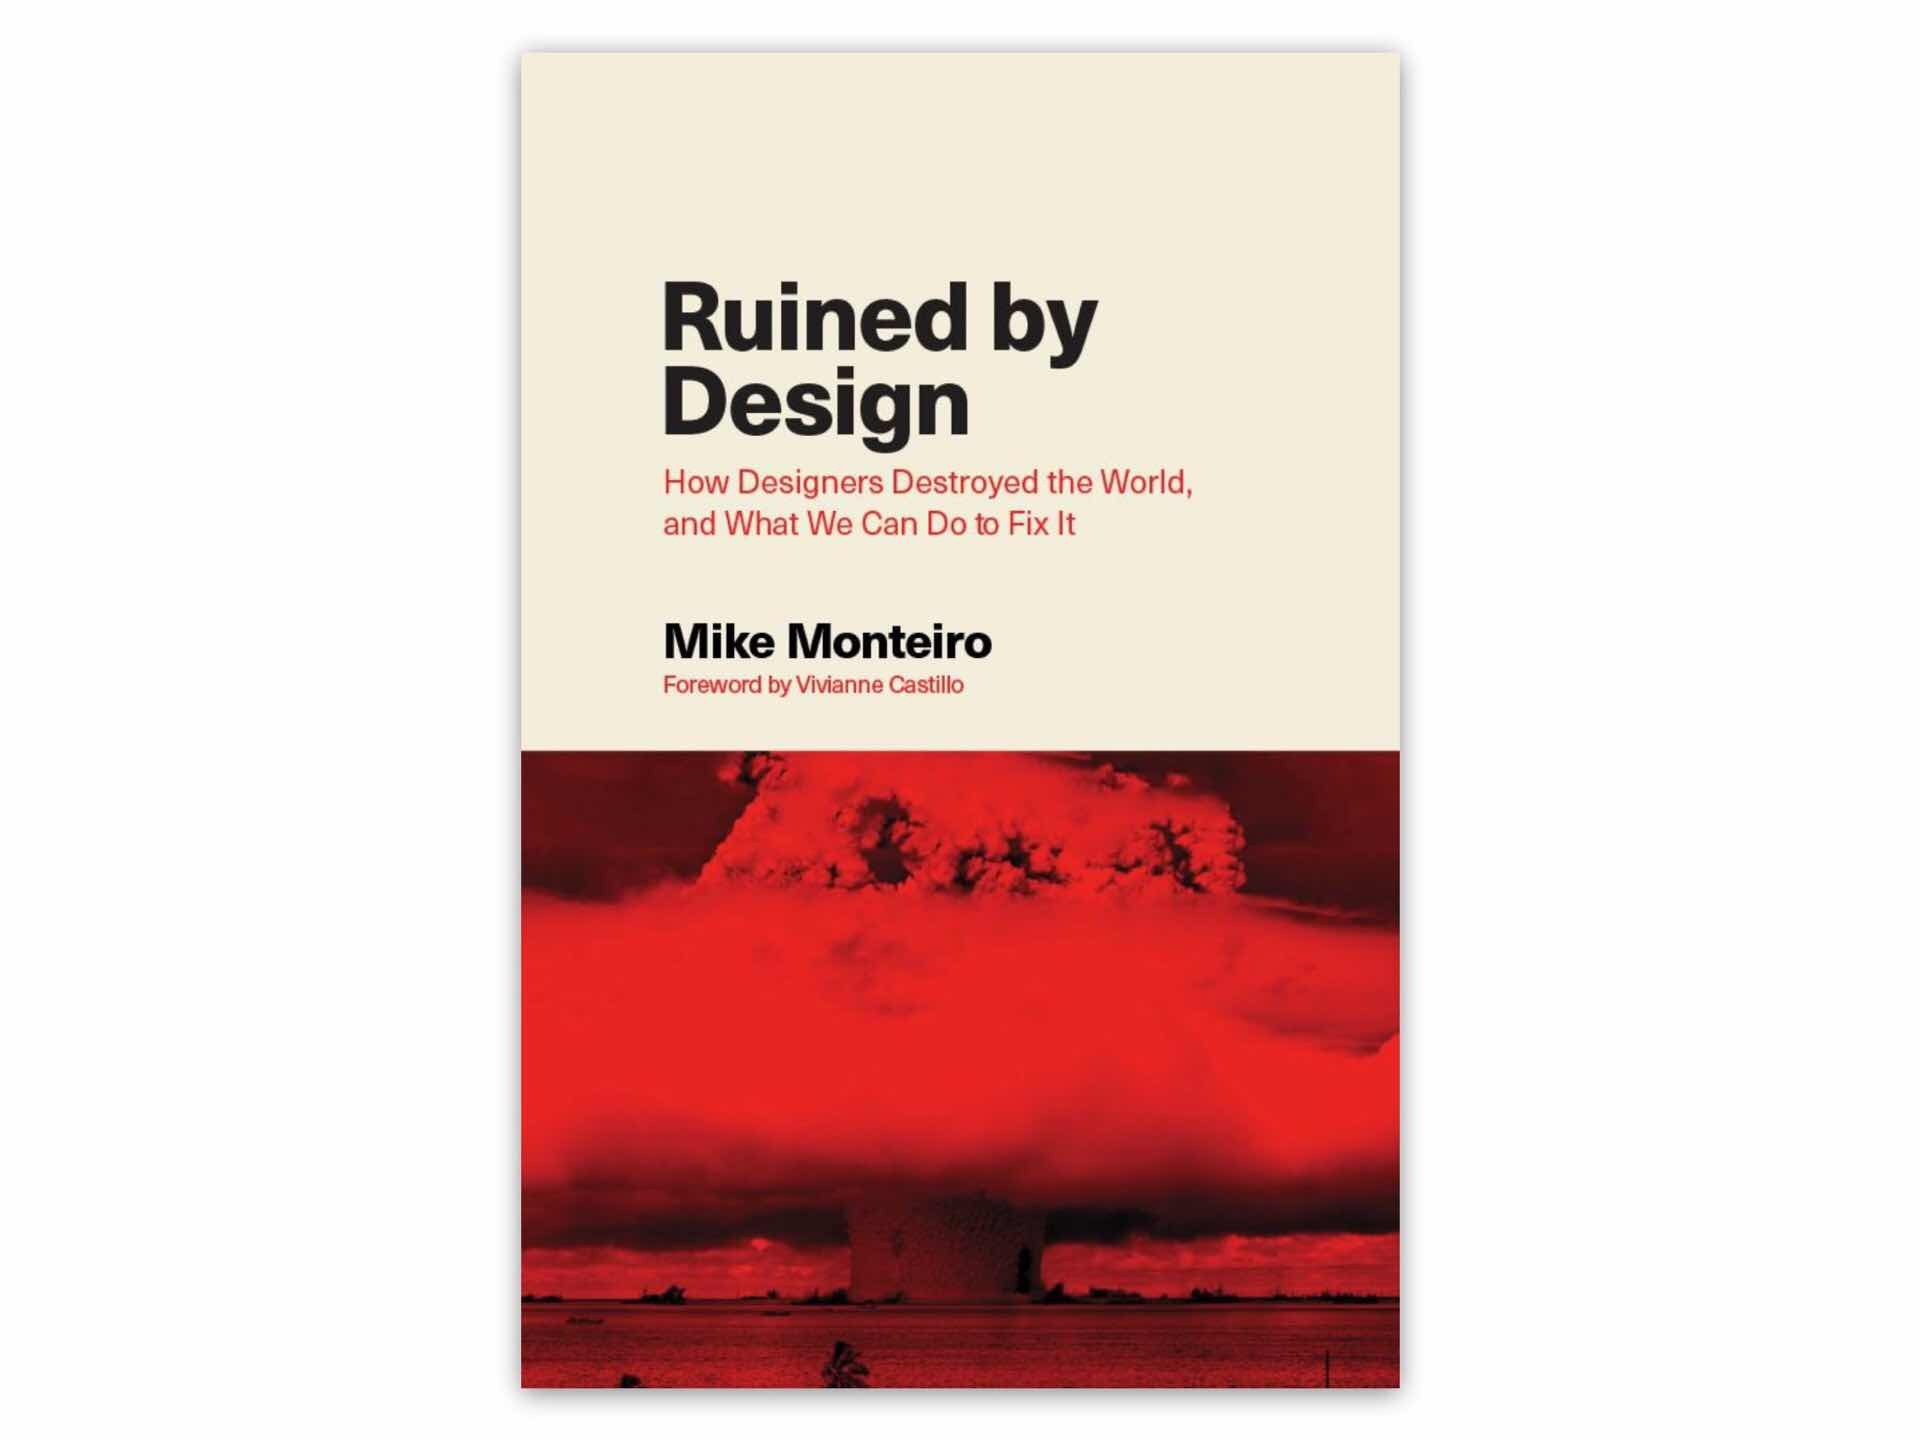 Ruined by Design by Mike Monteiro.